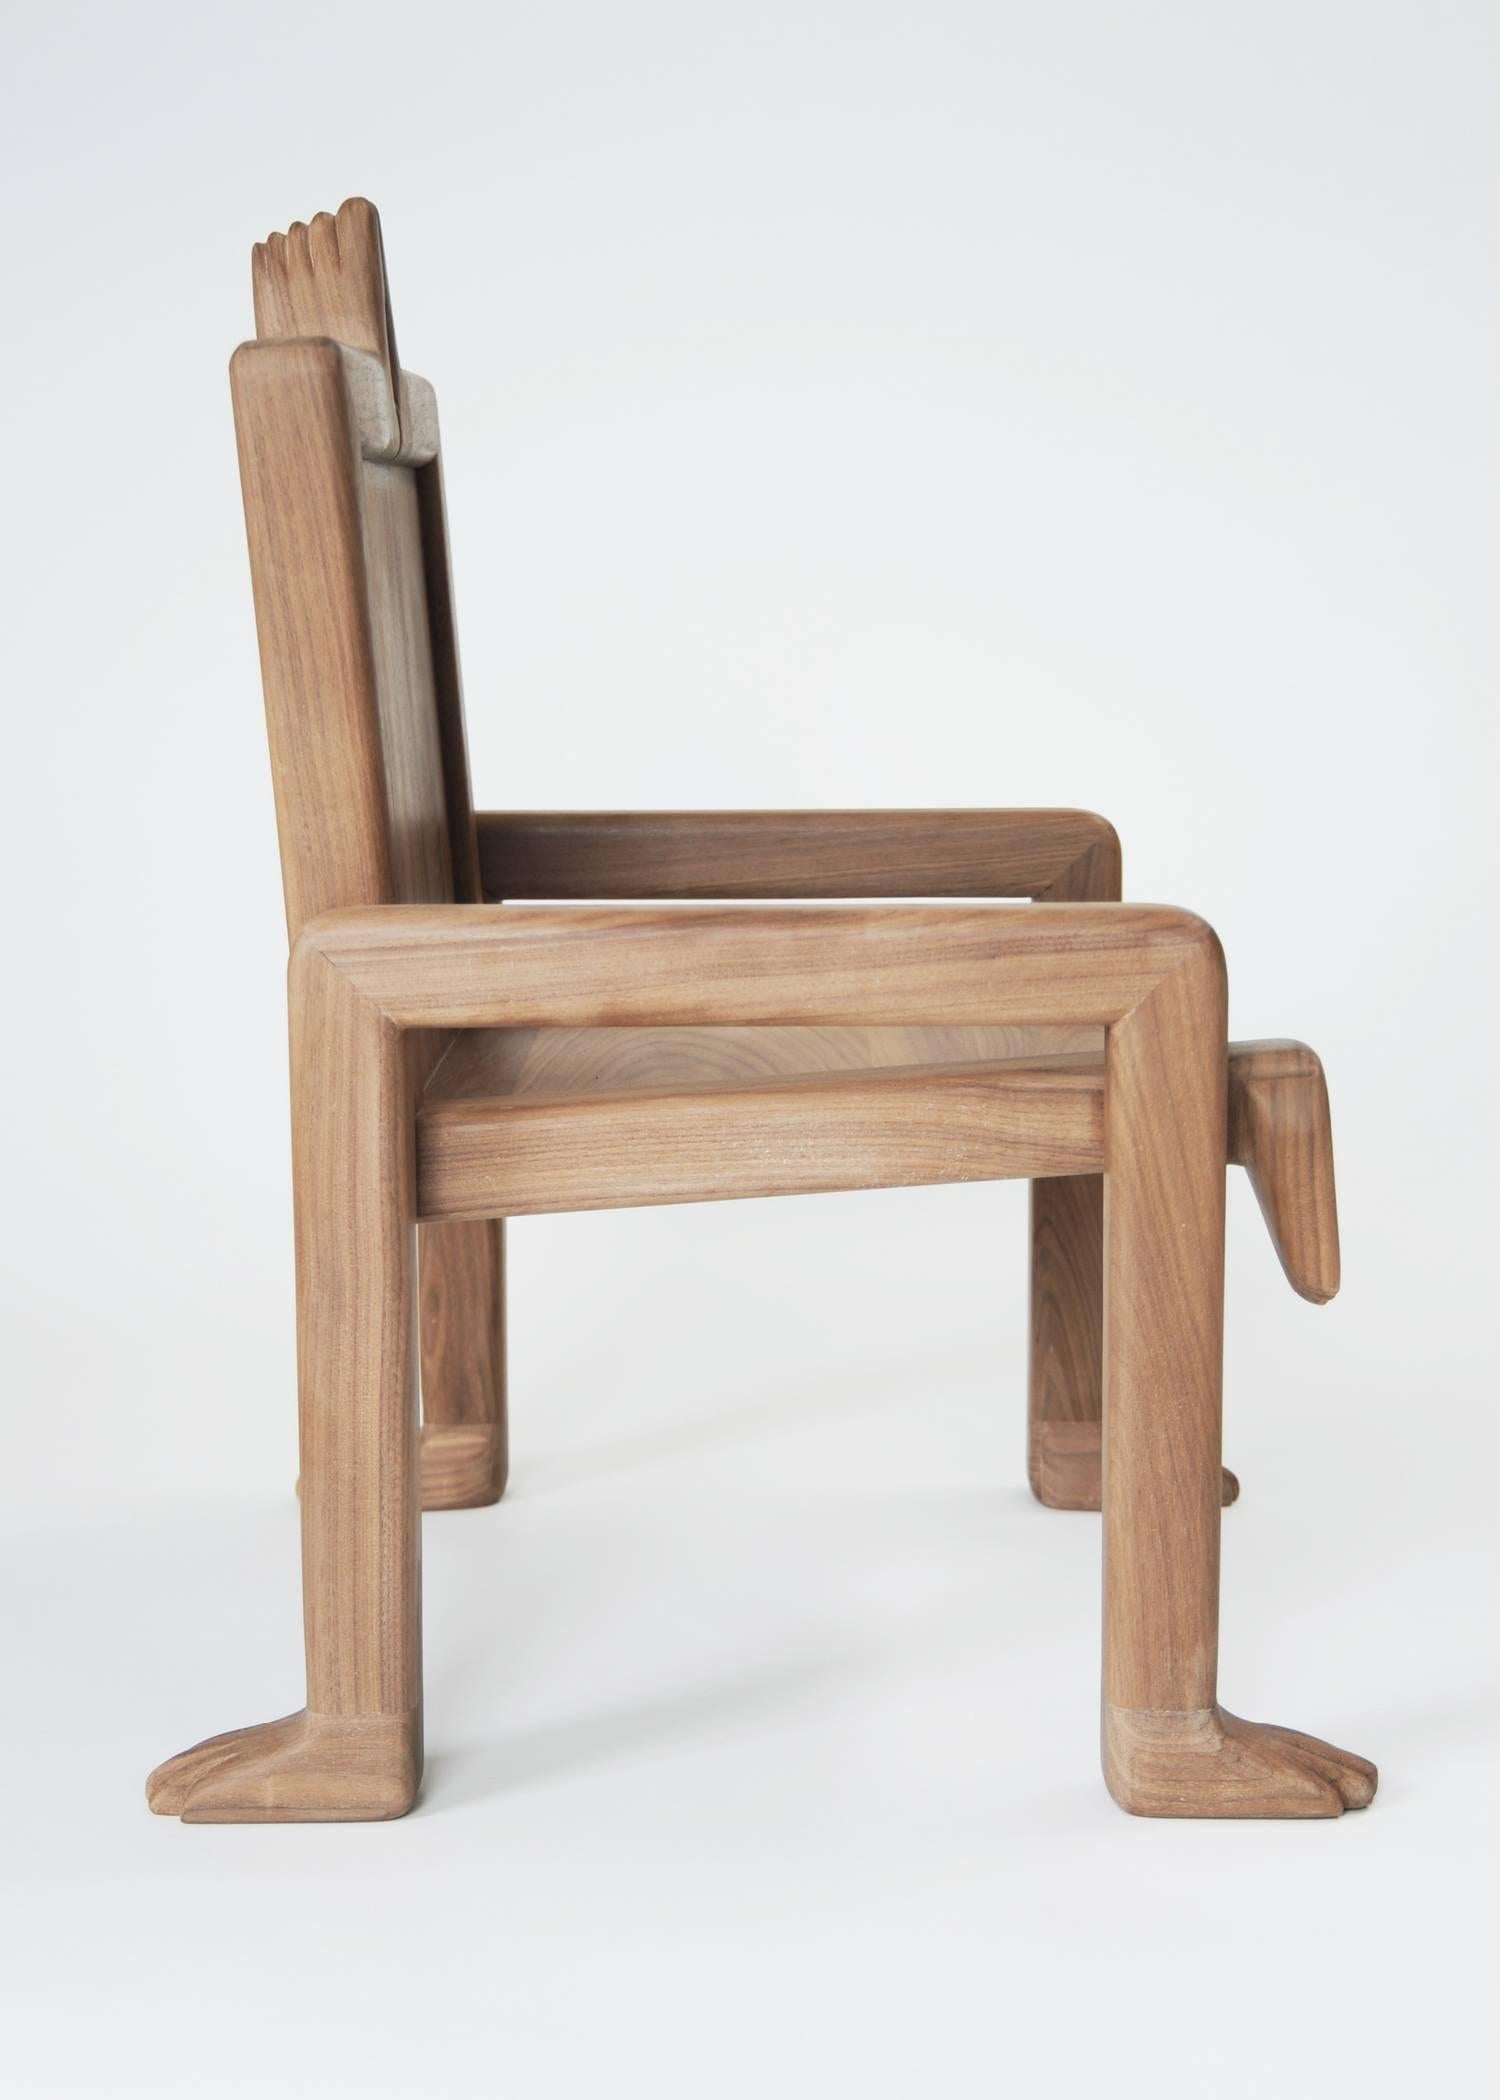 American Contemporary Children's 'Crawl' Chair by Material Lust, 2015 For Sale